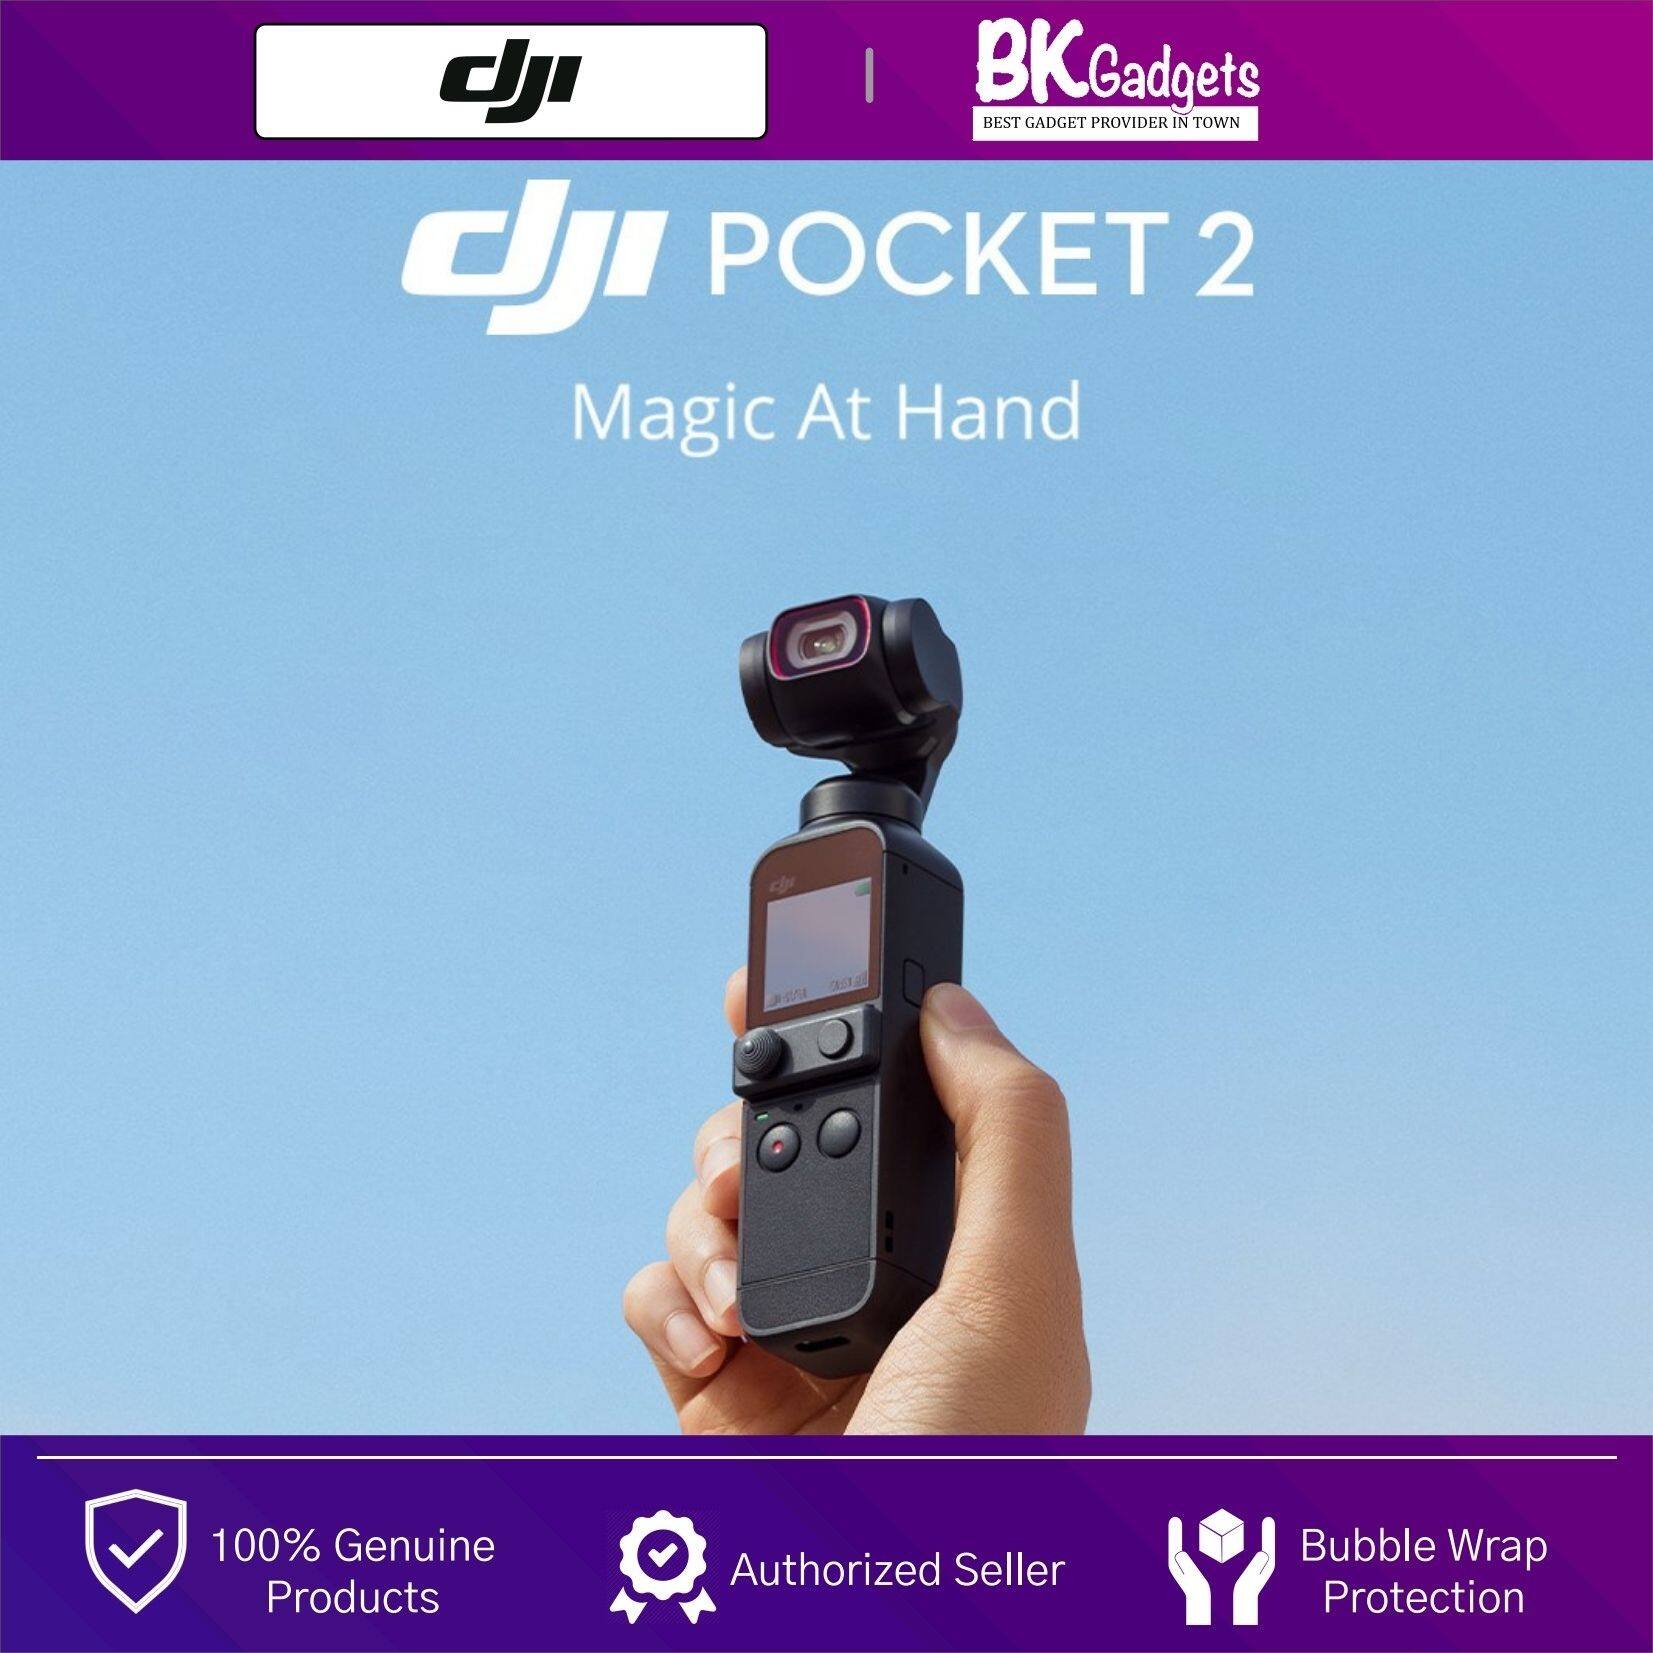 DJI Osmo Pocket 2 - HDR Video | Active Track 3.0 | Timelapse | 8x Zoom | AudioZoom | AI Editor | Pocket-Sized